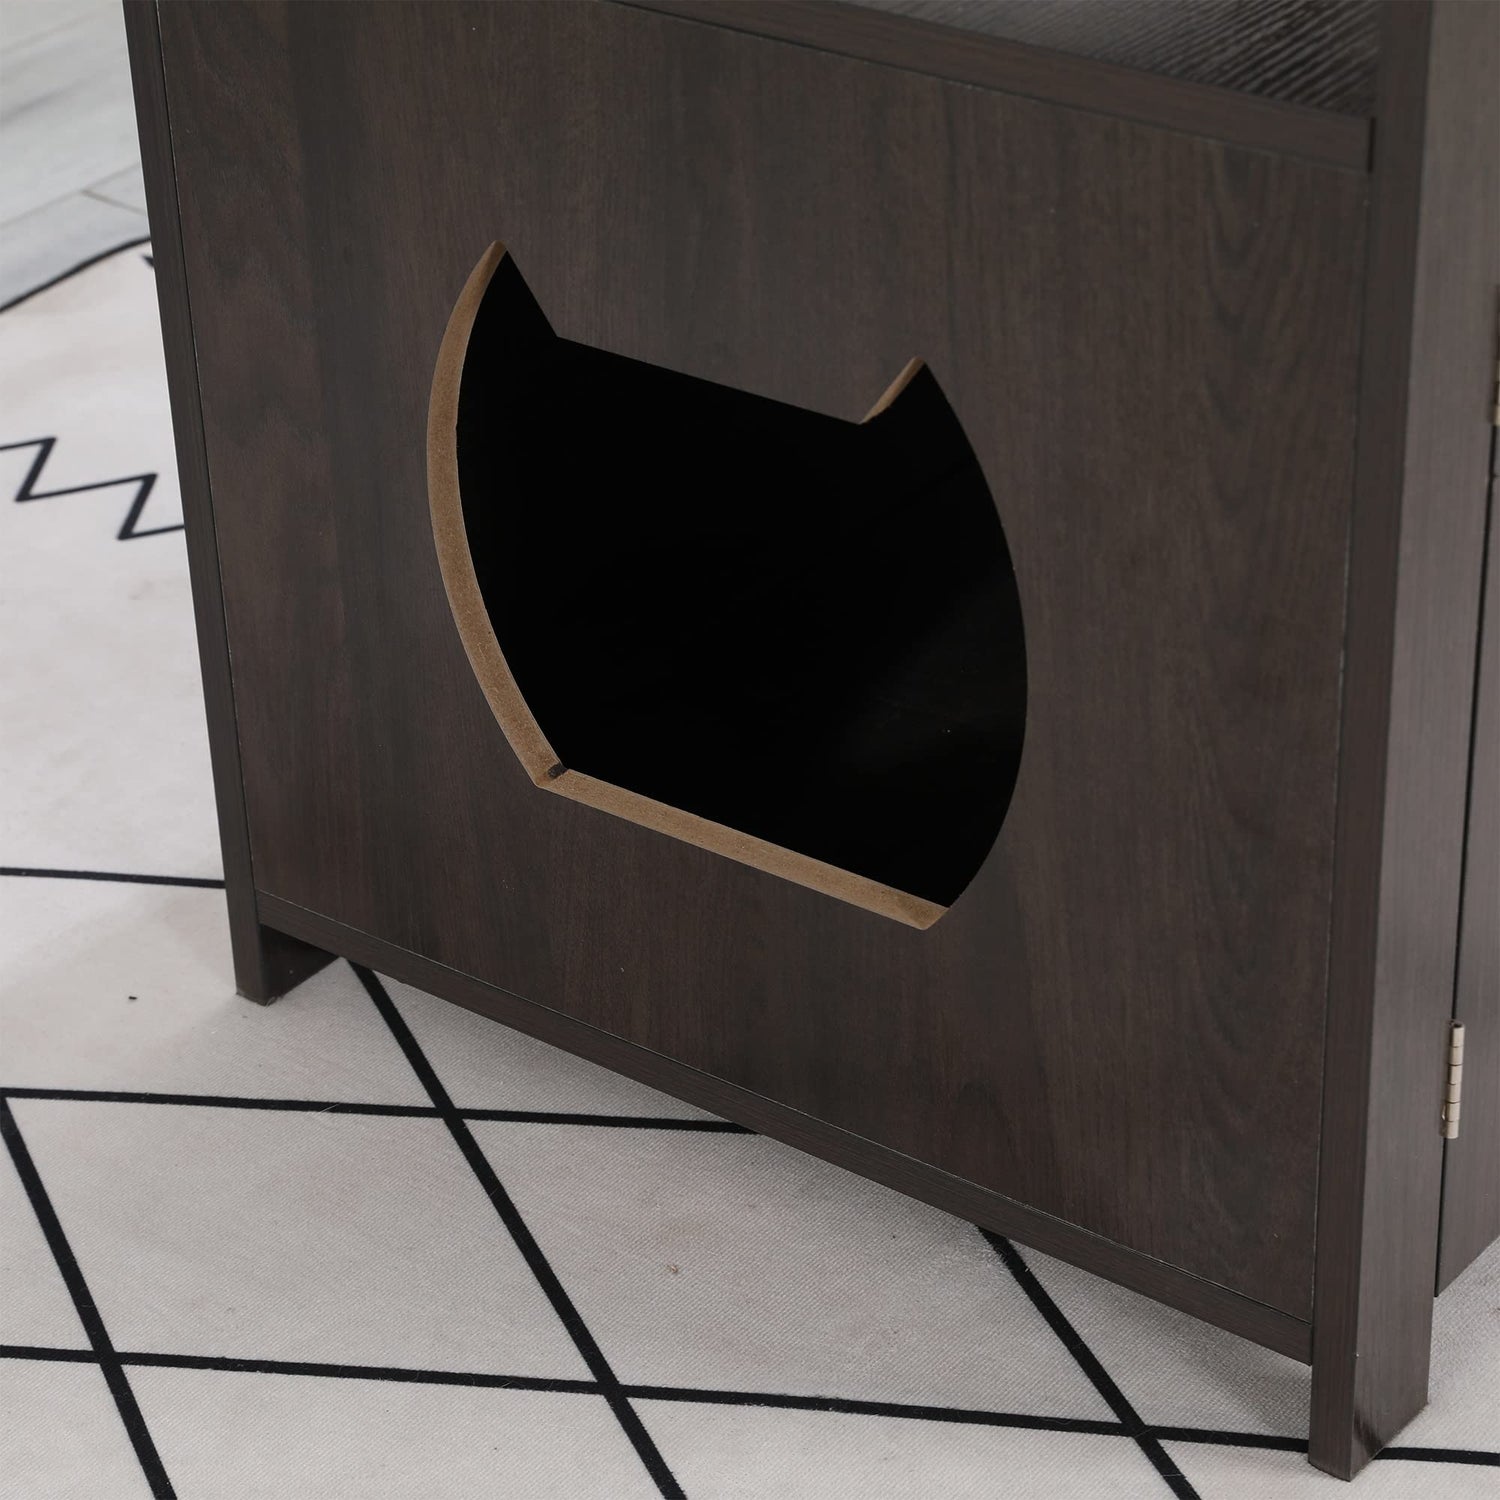 Dicoly 30 Inches Wooden Cat Litter Box Enclosure Furniture Table Wooden Cat Litter Box Enclosure Furniture with Adjustable Interior Wall Large Tabletop for Nightstand Animals & Pet Supplies > Pet Supplies > Cat Supplies > Cat Furniture Dicoly   